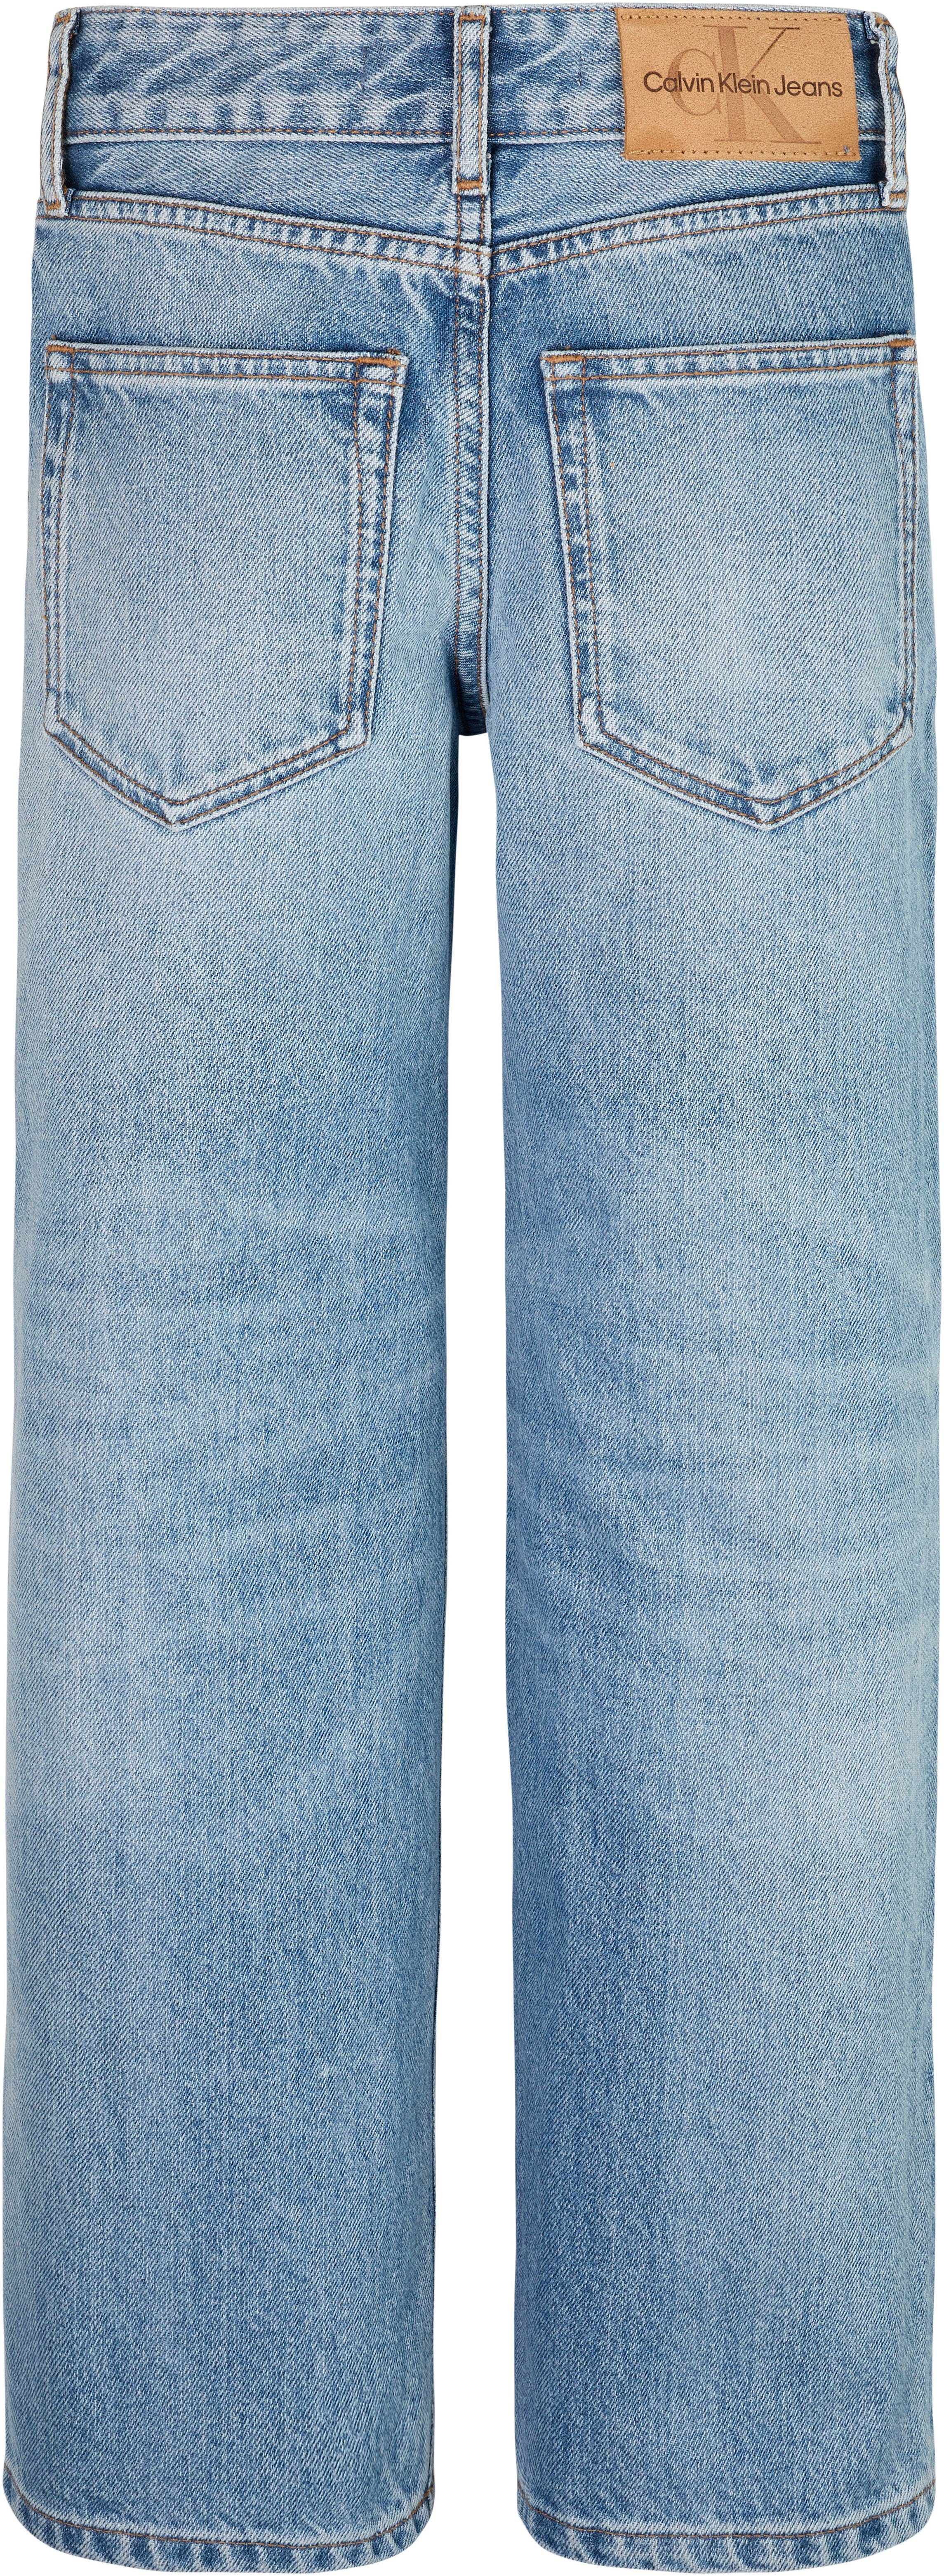 Calvin Klein Jeans Stretch-Jeans AUTH. SKATER RELAXED BLUE LIGHT